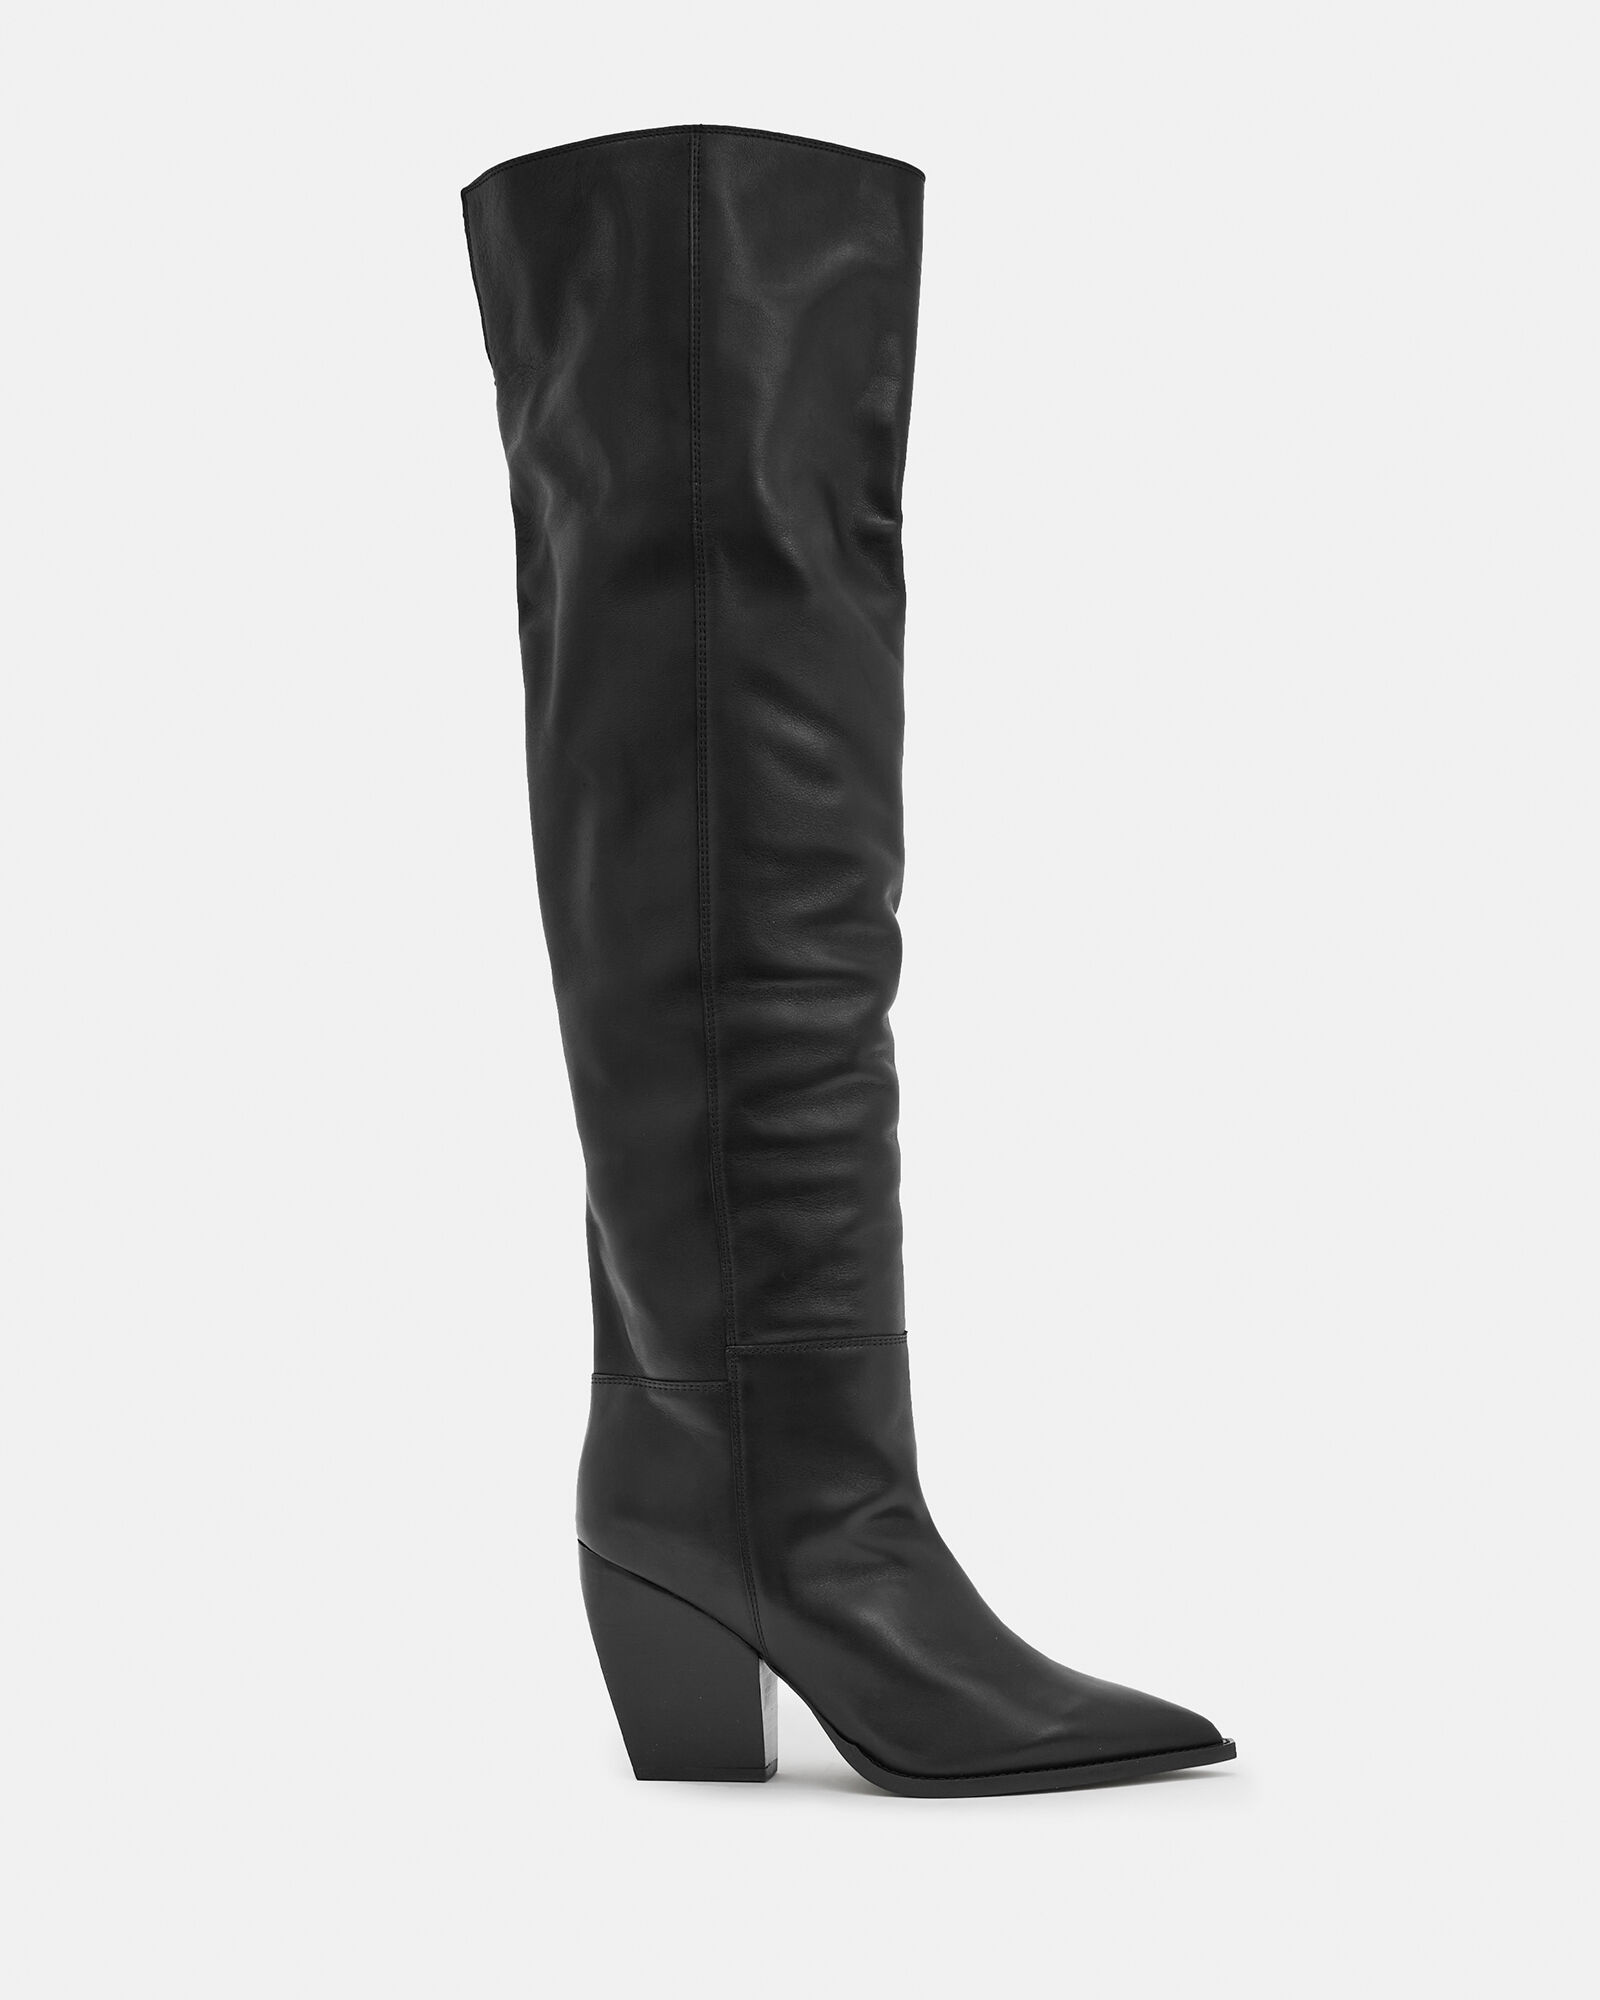 Buy Kitulandy Women's Over The Knee Boots High Heels Zipper PU Leather Thigh  High Boot at Amazon.in